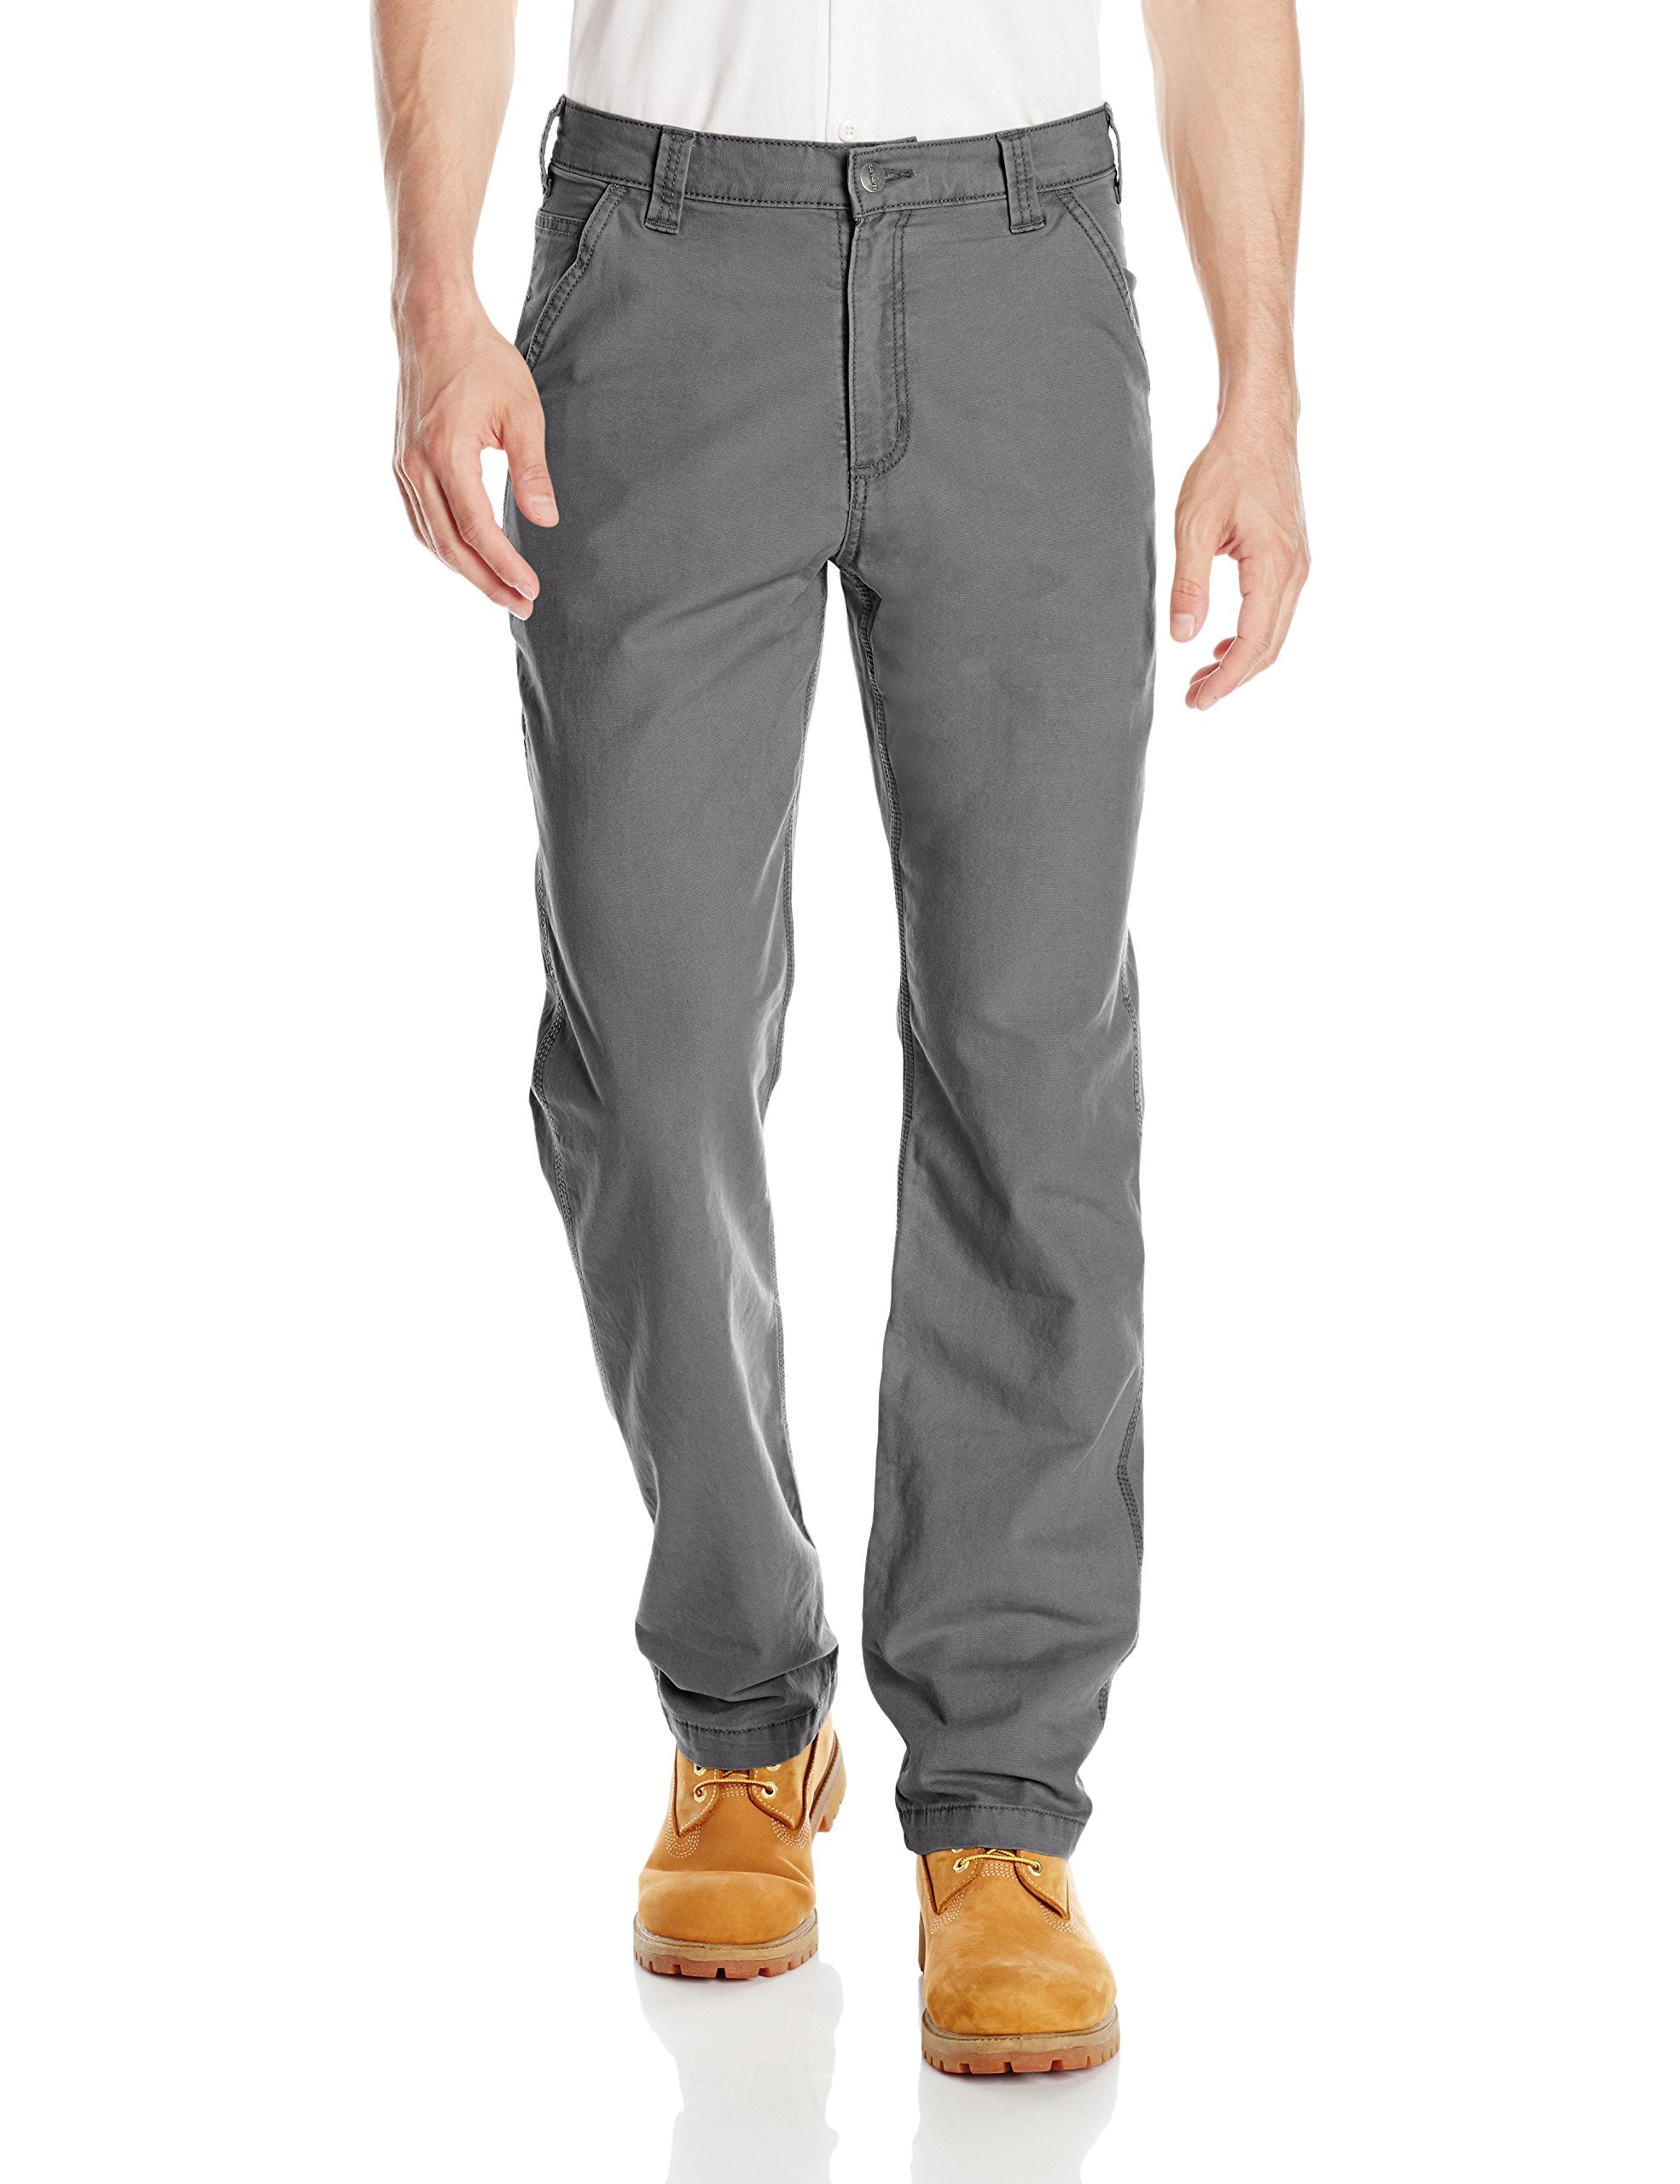 Carhartt 102291 Rugged Flex Relaxed Fit Canvas Work Pant